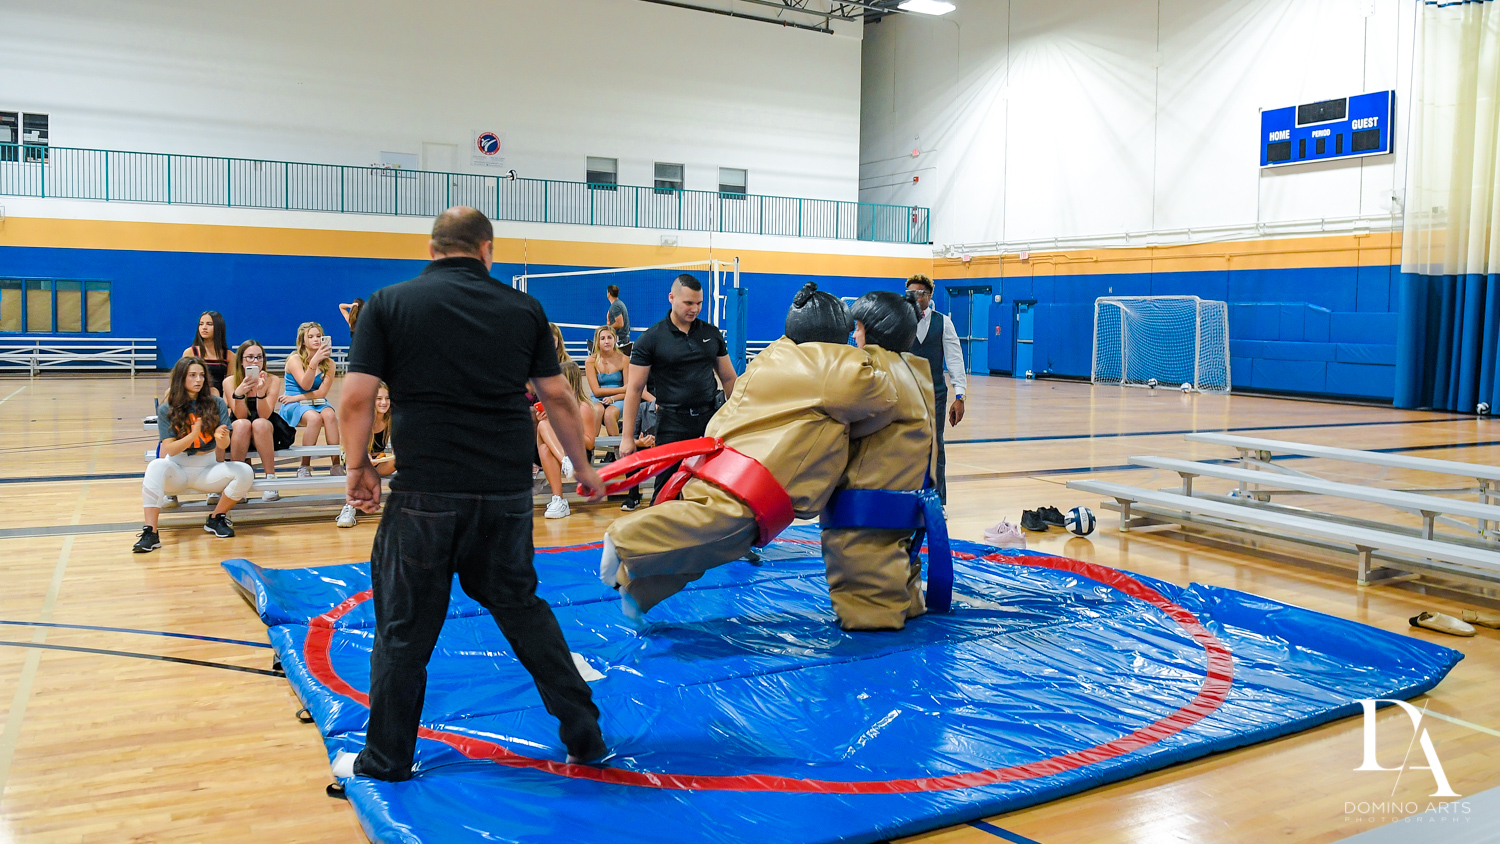 fun kids sumo wrestling at Sports Theme Bar Mitzvah at DS Sports Plex by Domino Arts Photography